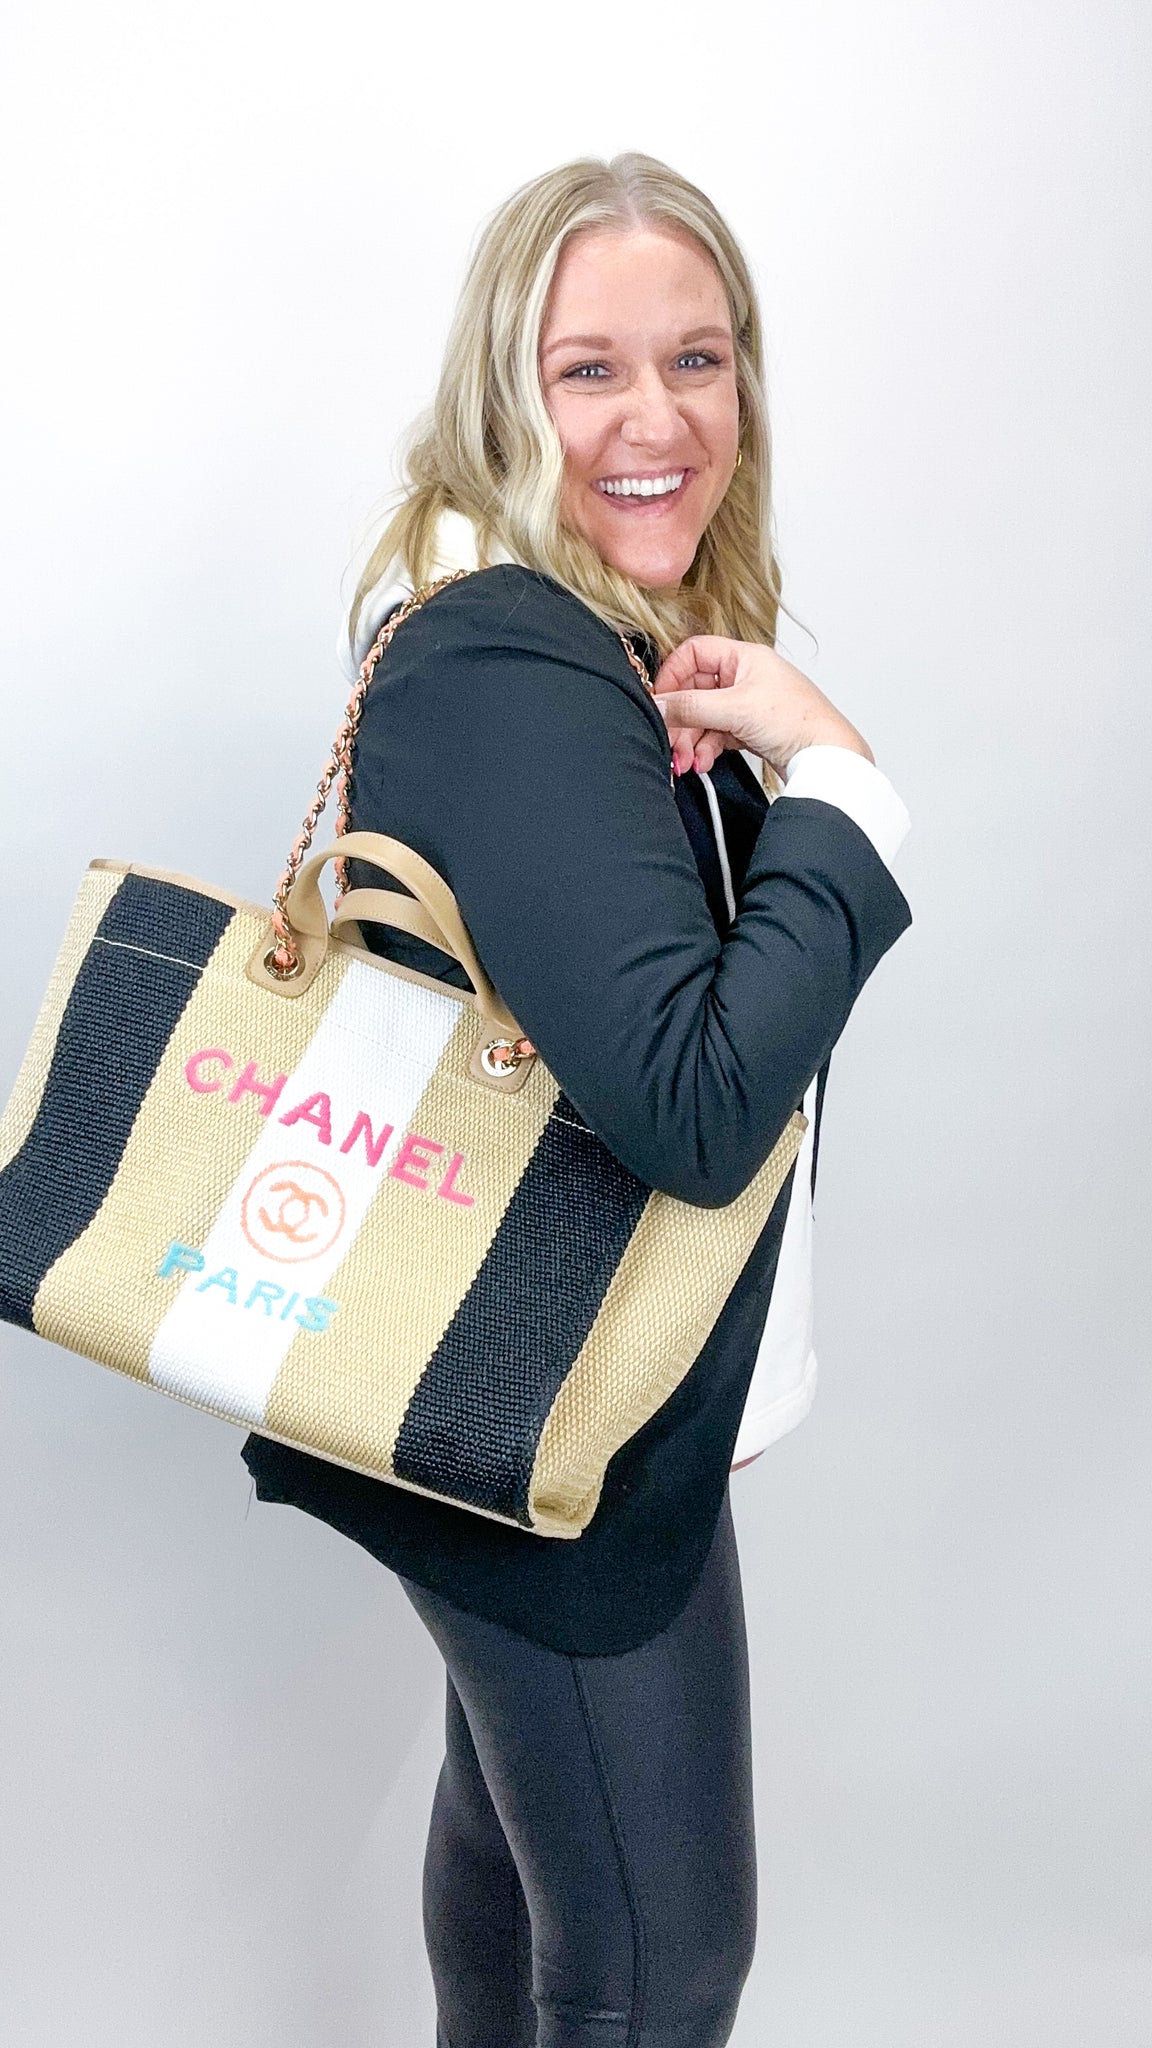 Chanel Deauville Logo Shopping Tote Printed Raffia Large worn by Brynn  Whitfield as seen in The Real Housewives of New York City (S14E08)